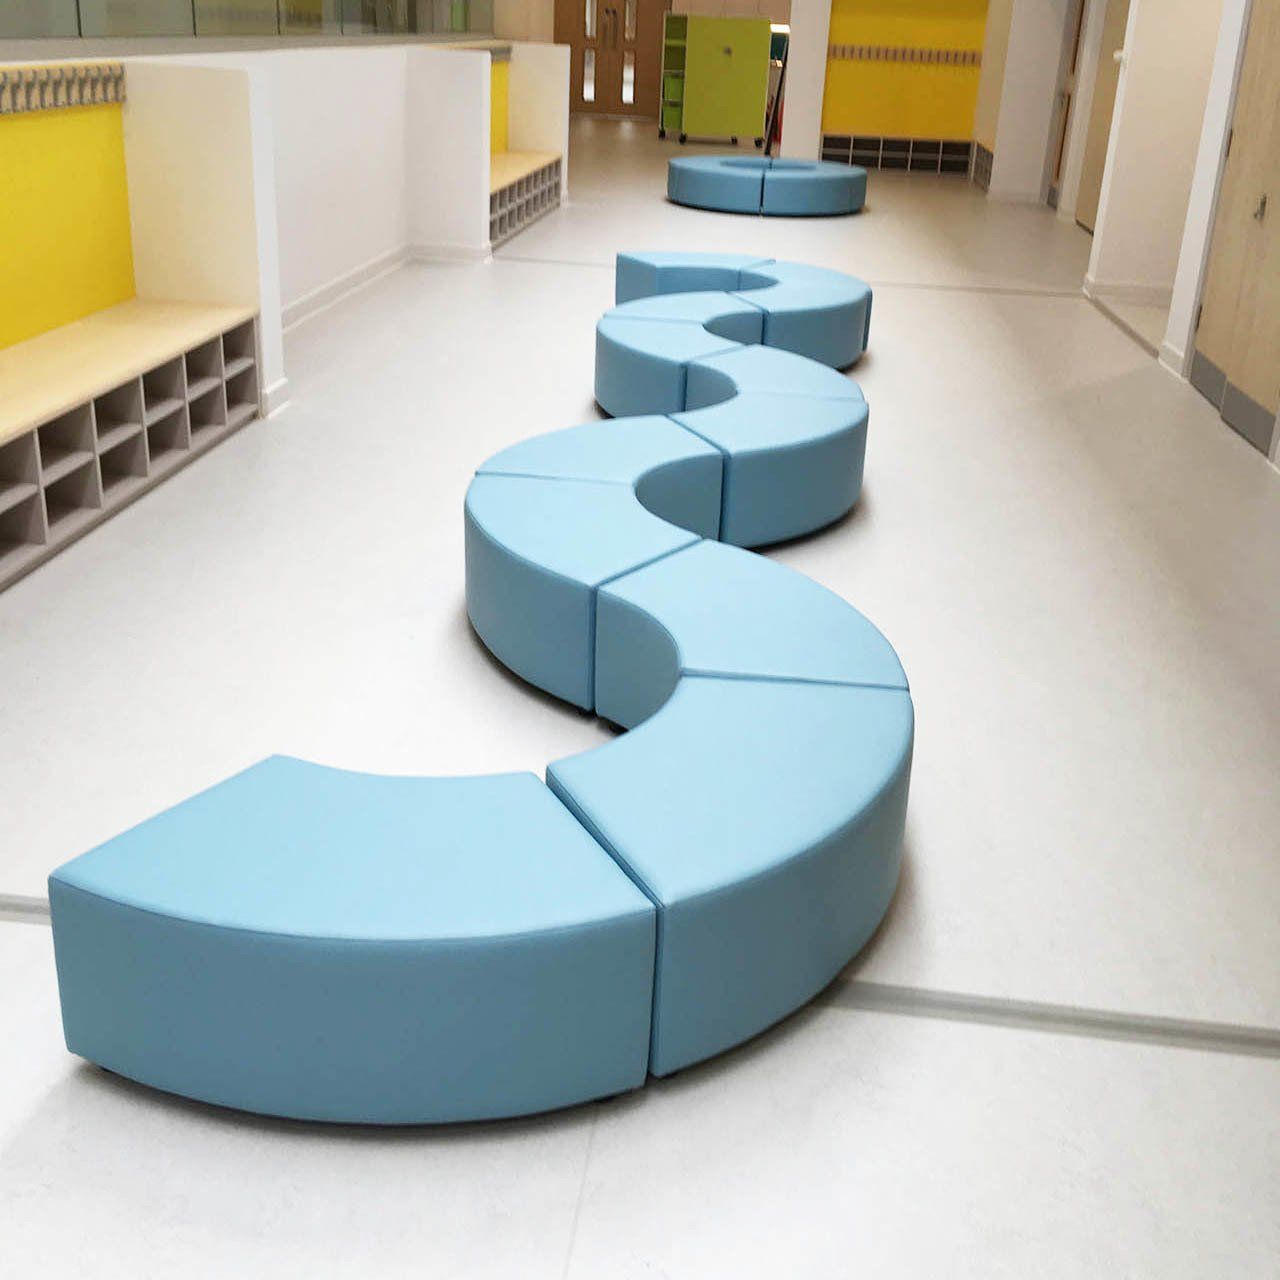 Vinyl modular pod stools in curved confifuration